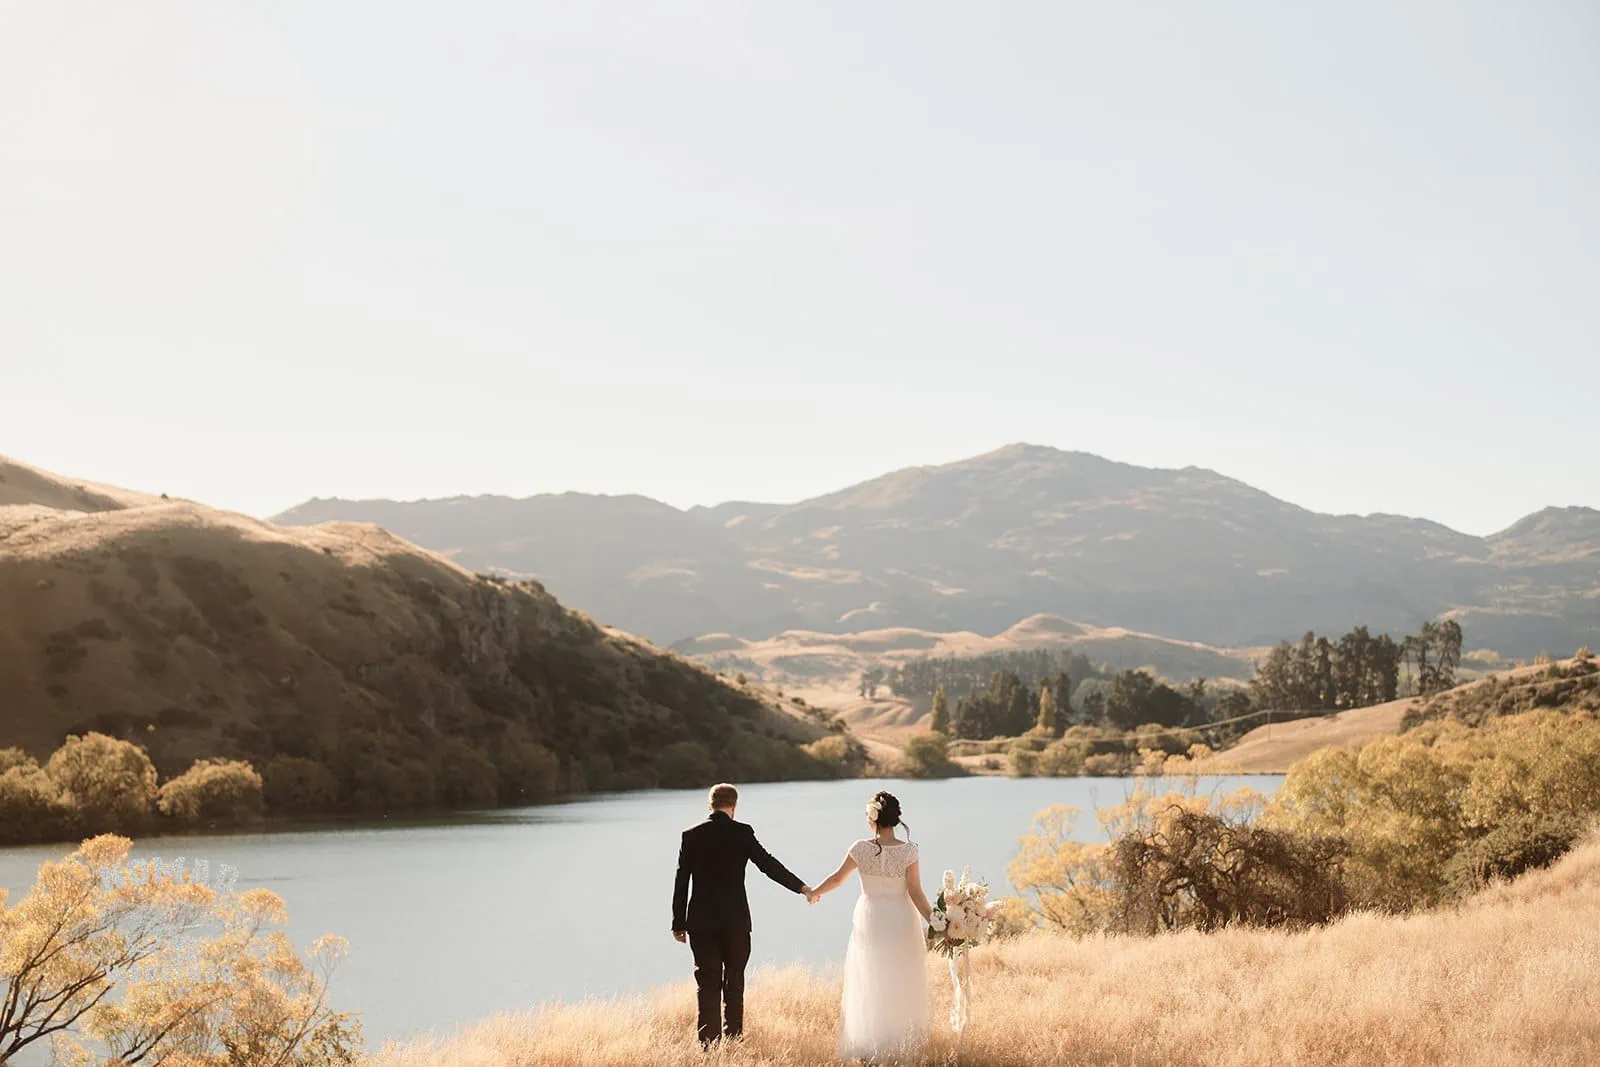 Queenstown New Zealand Elopement Wedding Photographer - A bride and groom standing on a grassy hill overlooking a lake during summer.